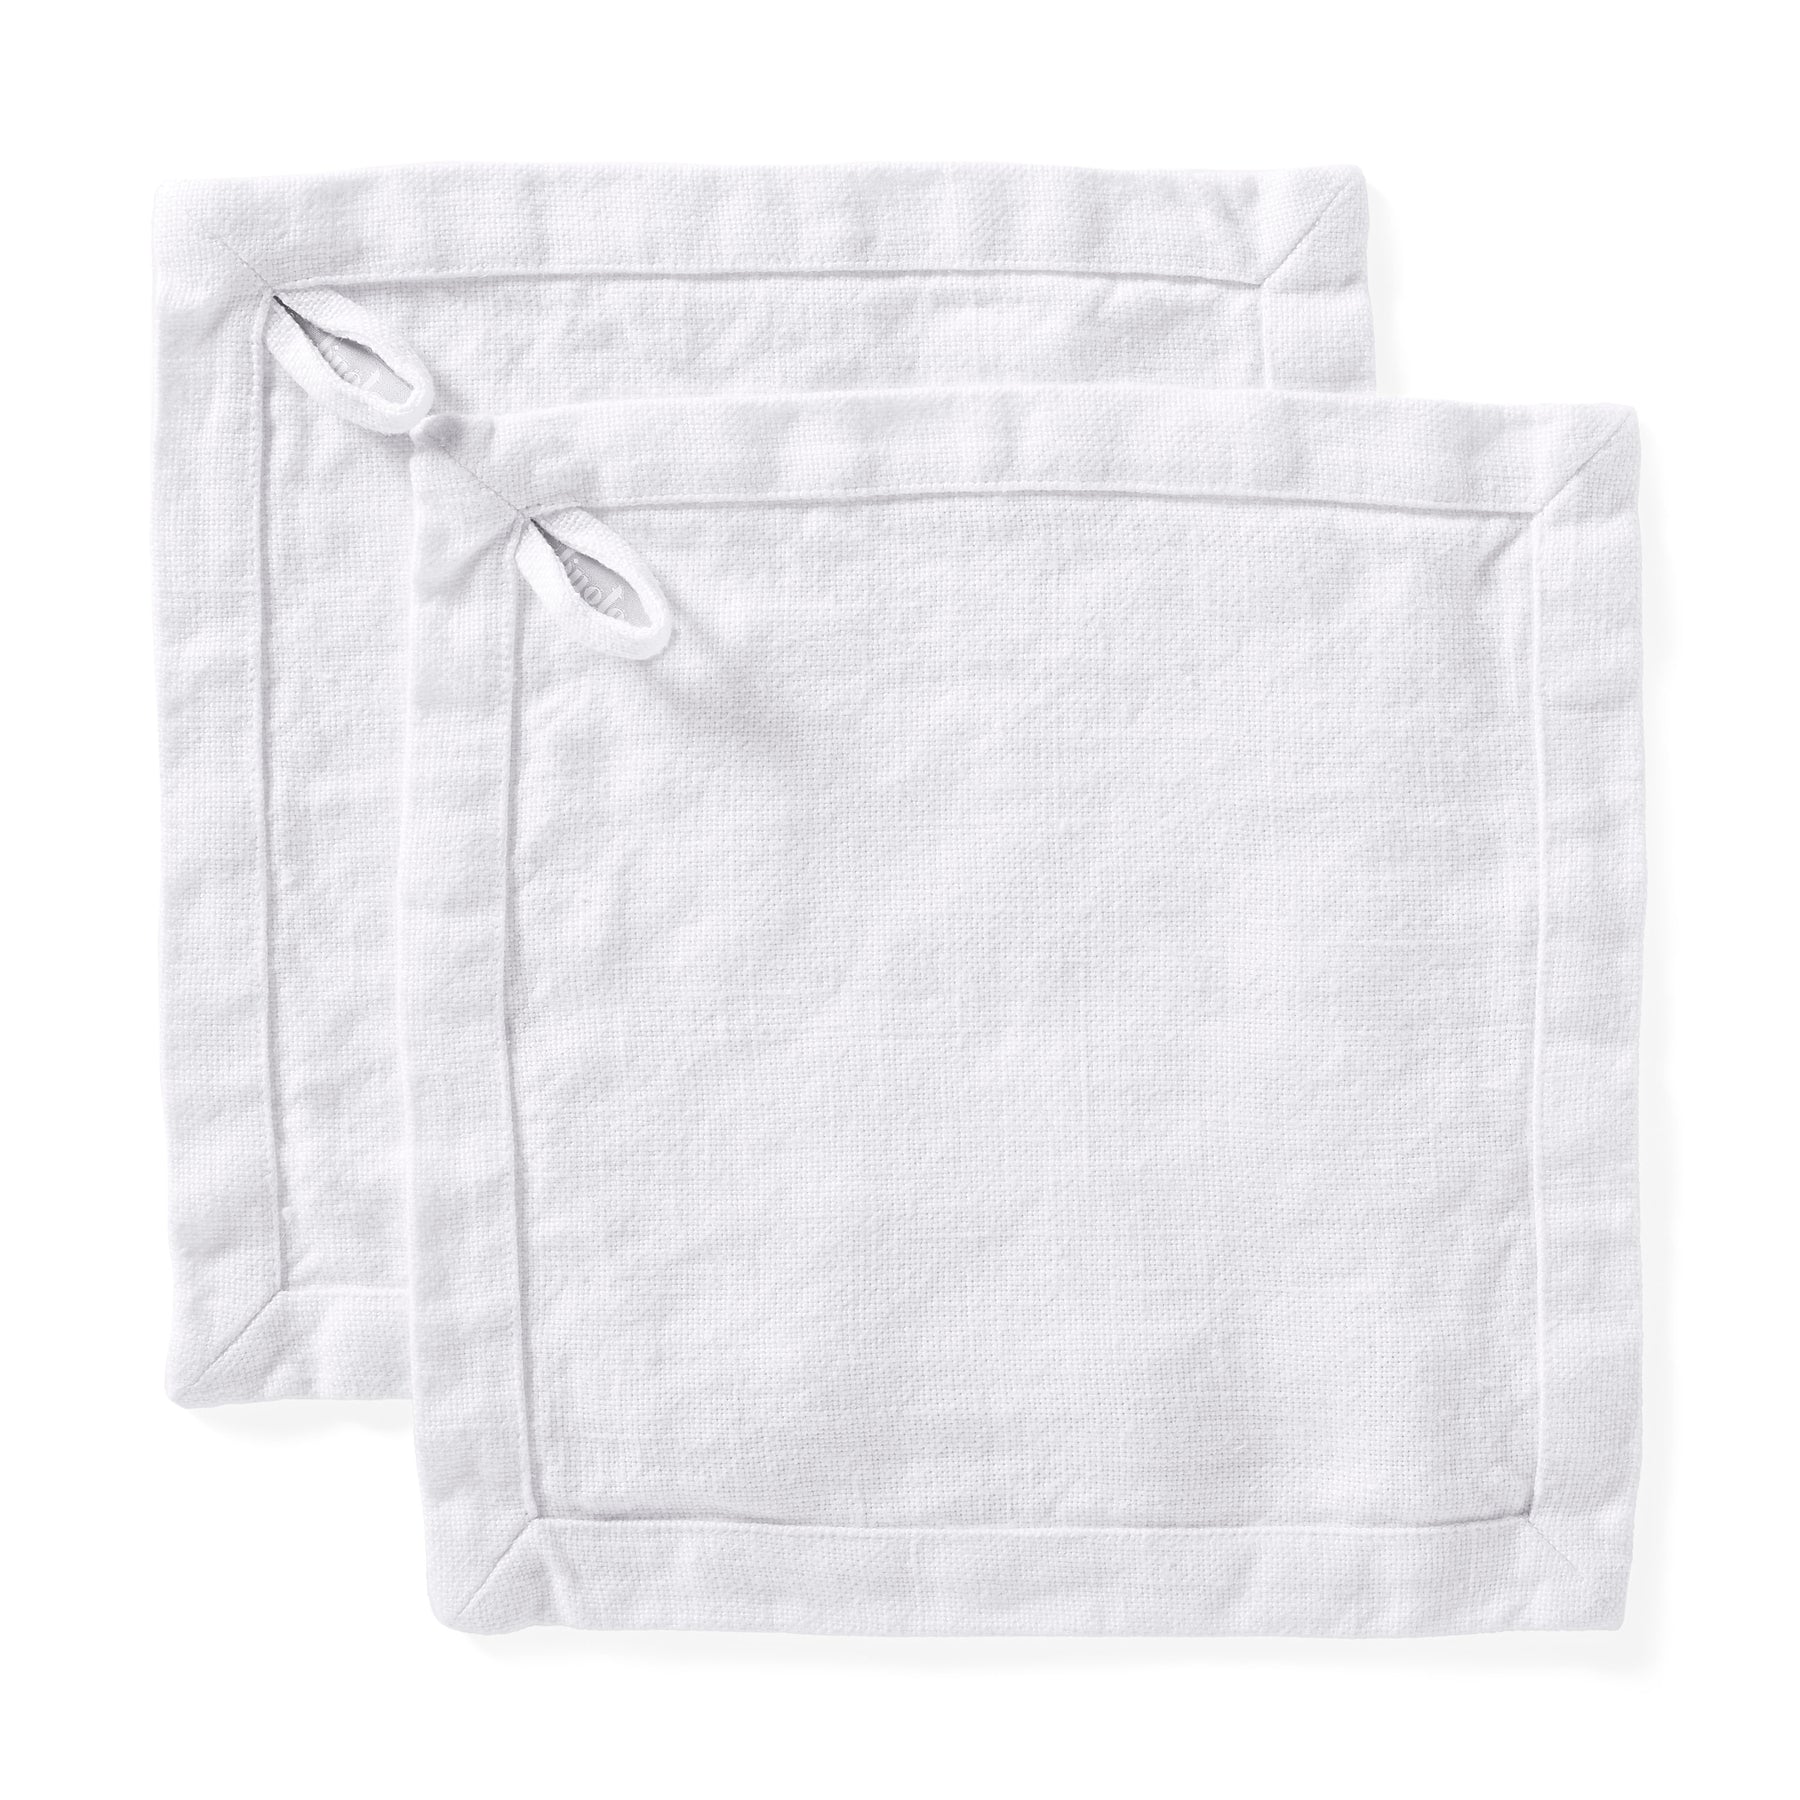 WestPoint Hospitality, Grand Patrician, Wash Cloth, 13x13, White, Washcloths, Towels, Bed and Bath Linens, Open Catalog